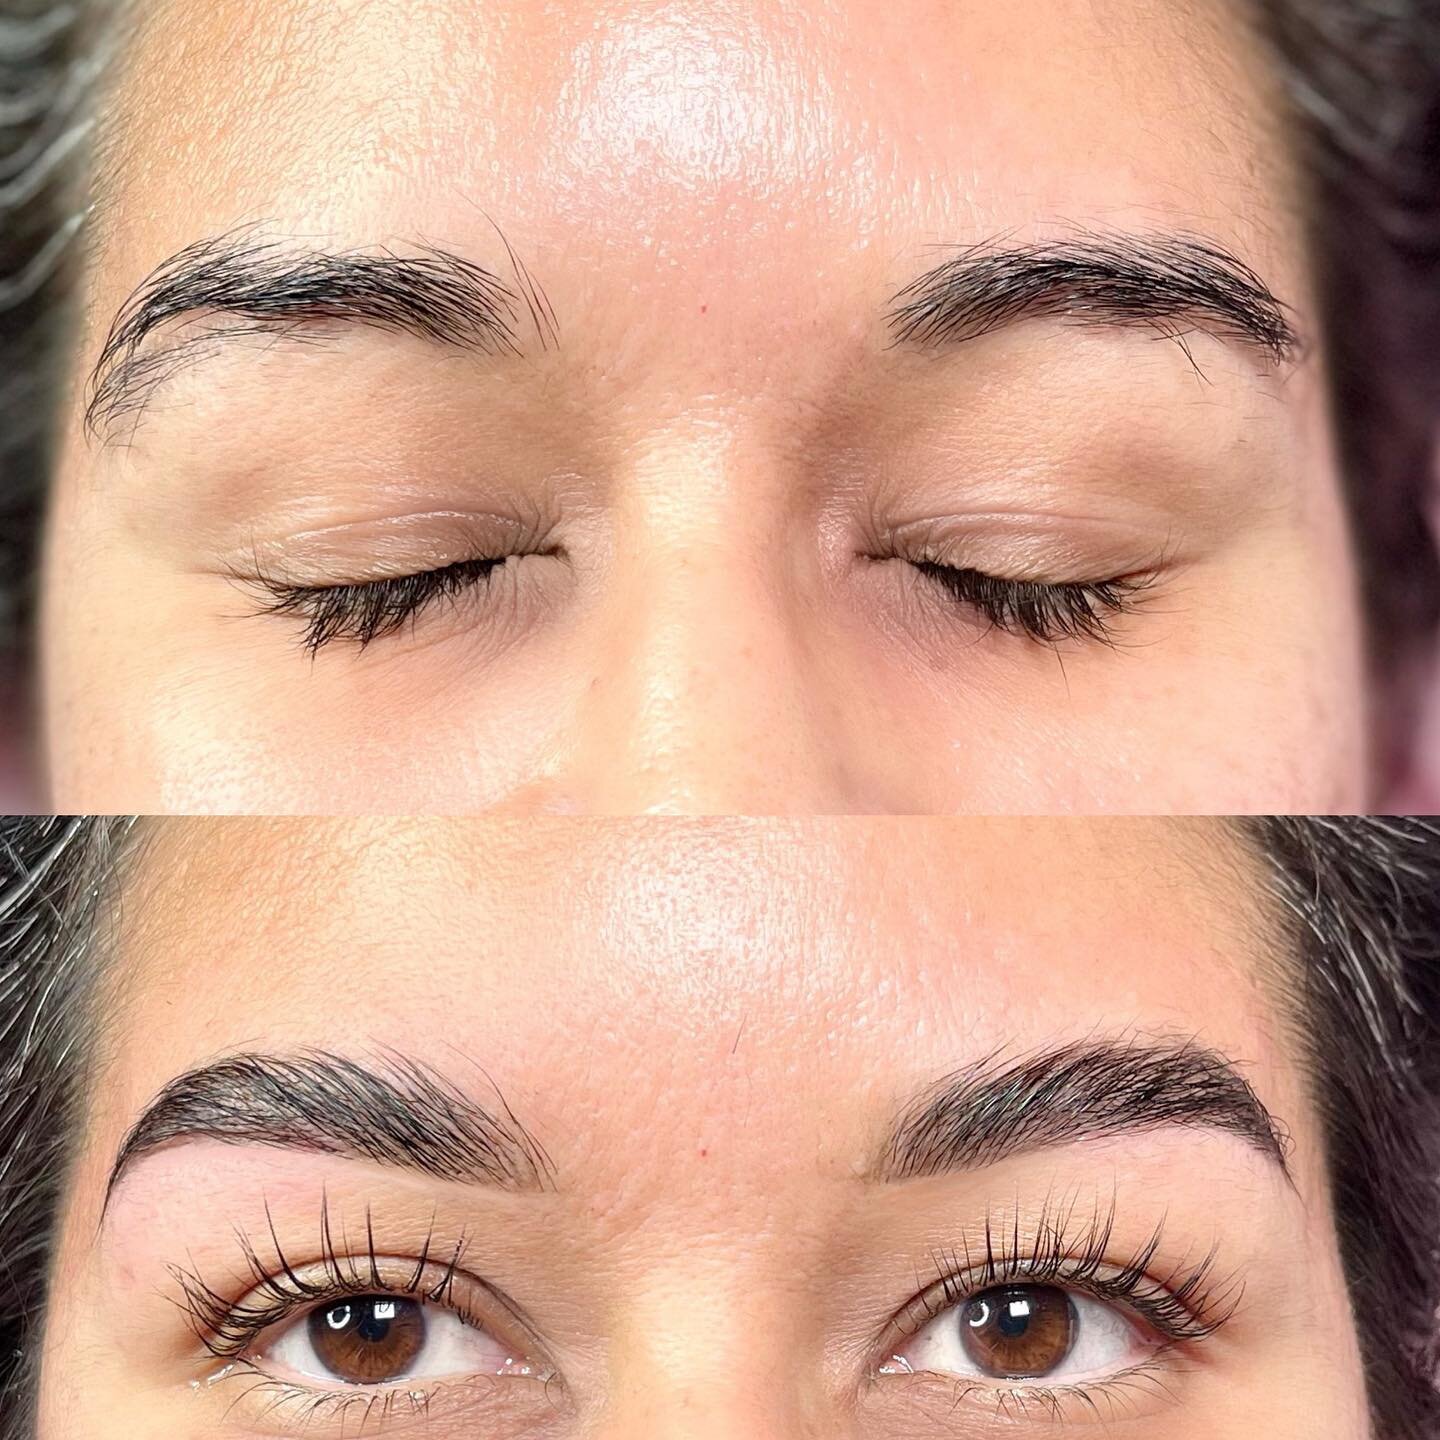 Get into this #beforeandafter 💕
Our lively client came in for a brow lamination + tint AND a lash lift + tint 
.
Her results were 😍😍😍
.
Each of these services are still currently $45 for the remainder of August. Book now via DM! &hearts;️